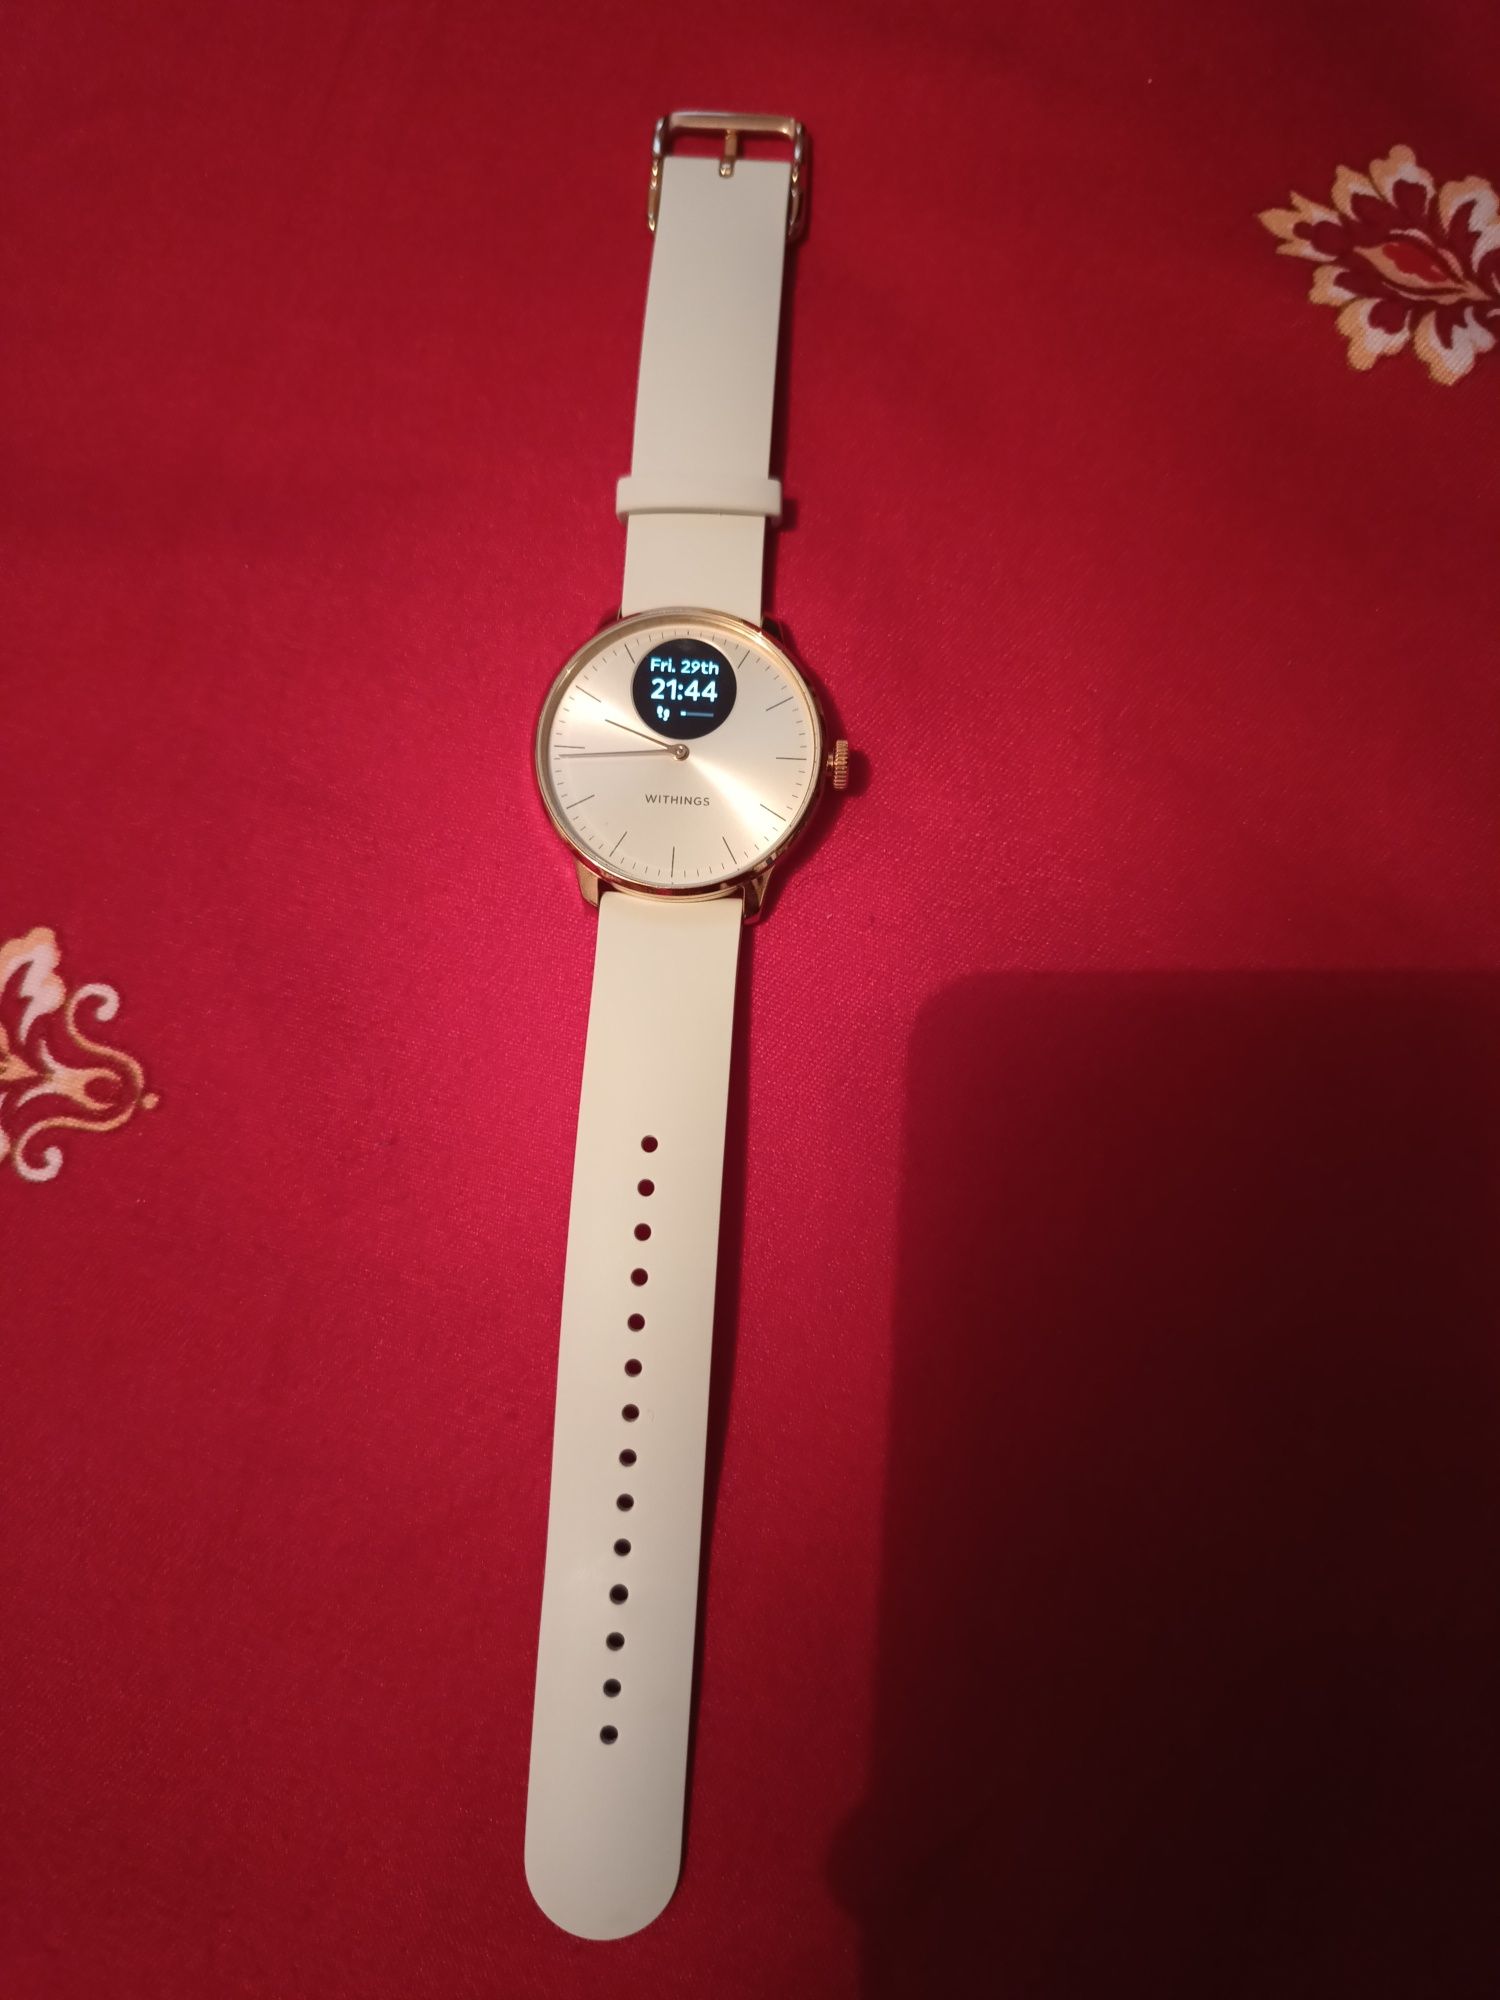 Smartwatch withings